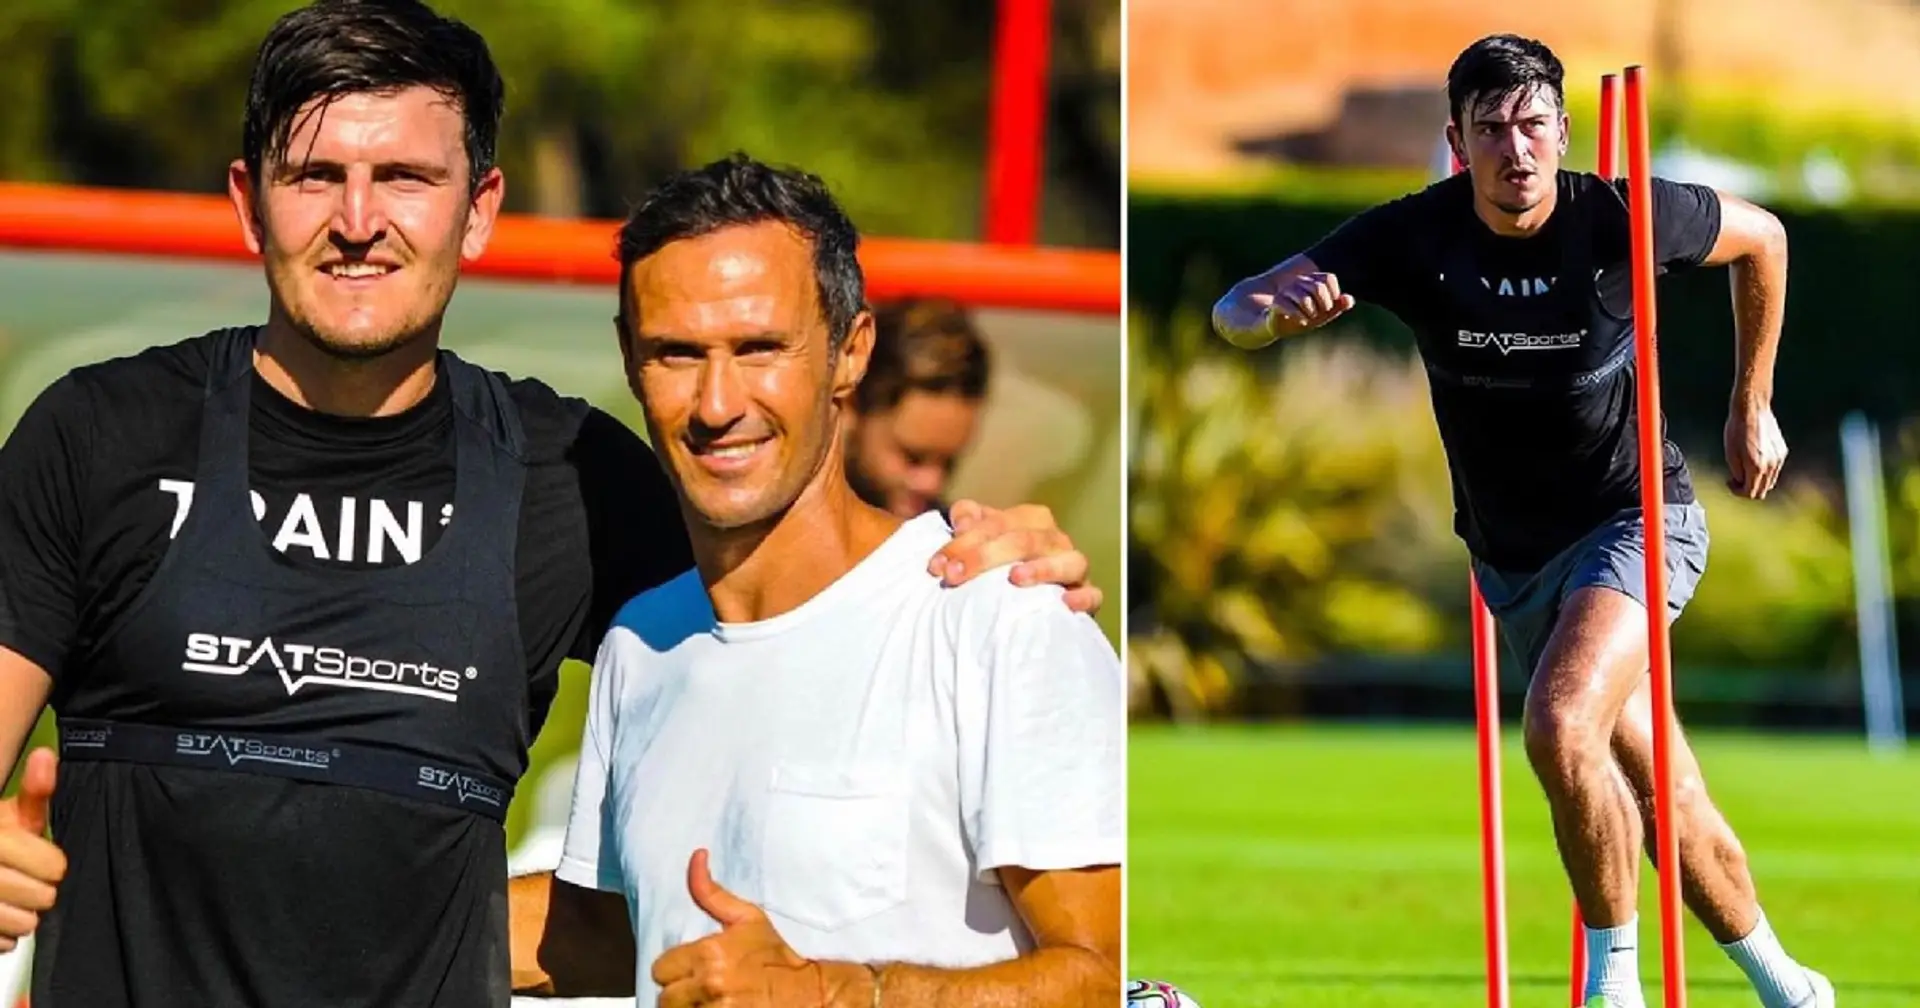 Maguire trains to impress Ten Hag & 2 more big Man United stories you might've missed